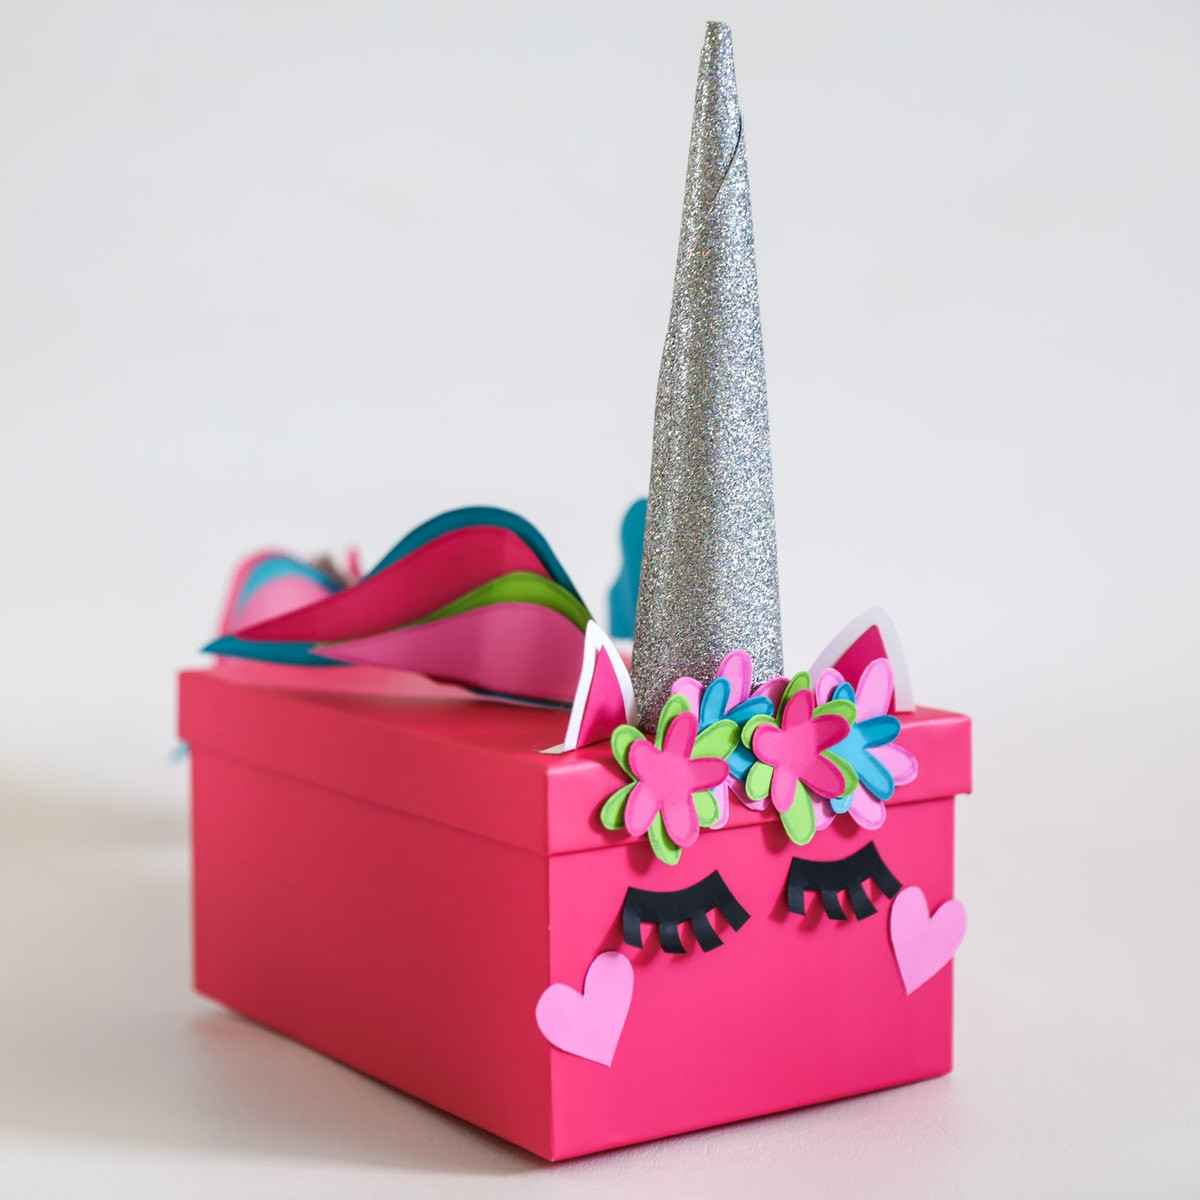 Valentines Day Boxes Ideas
 Valentines Box Ideas Step by Step Unicorn Robot & More